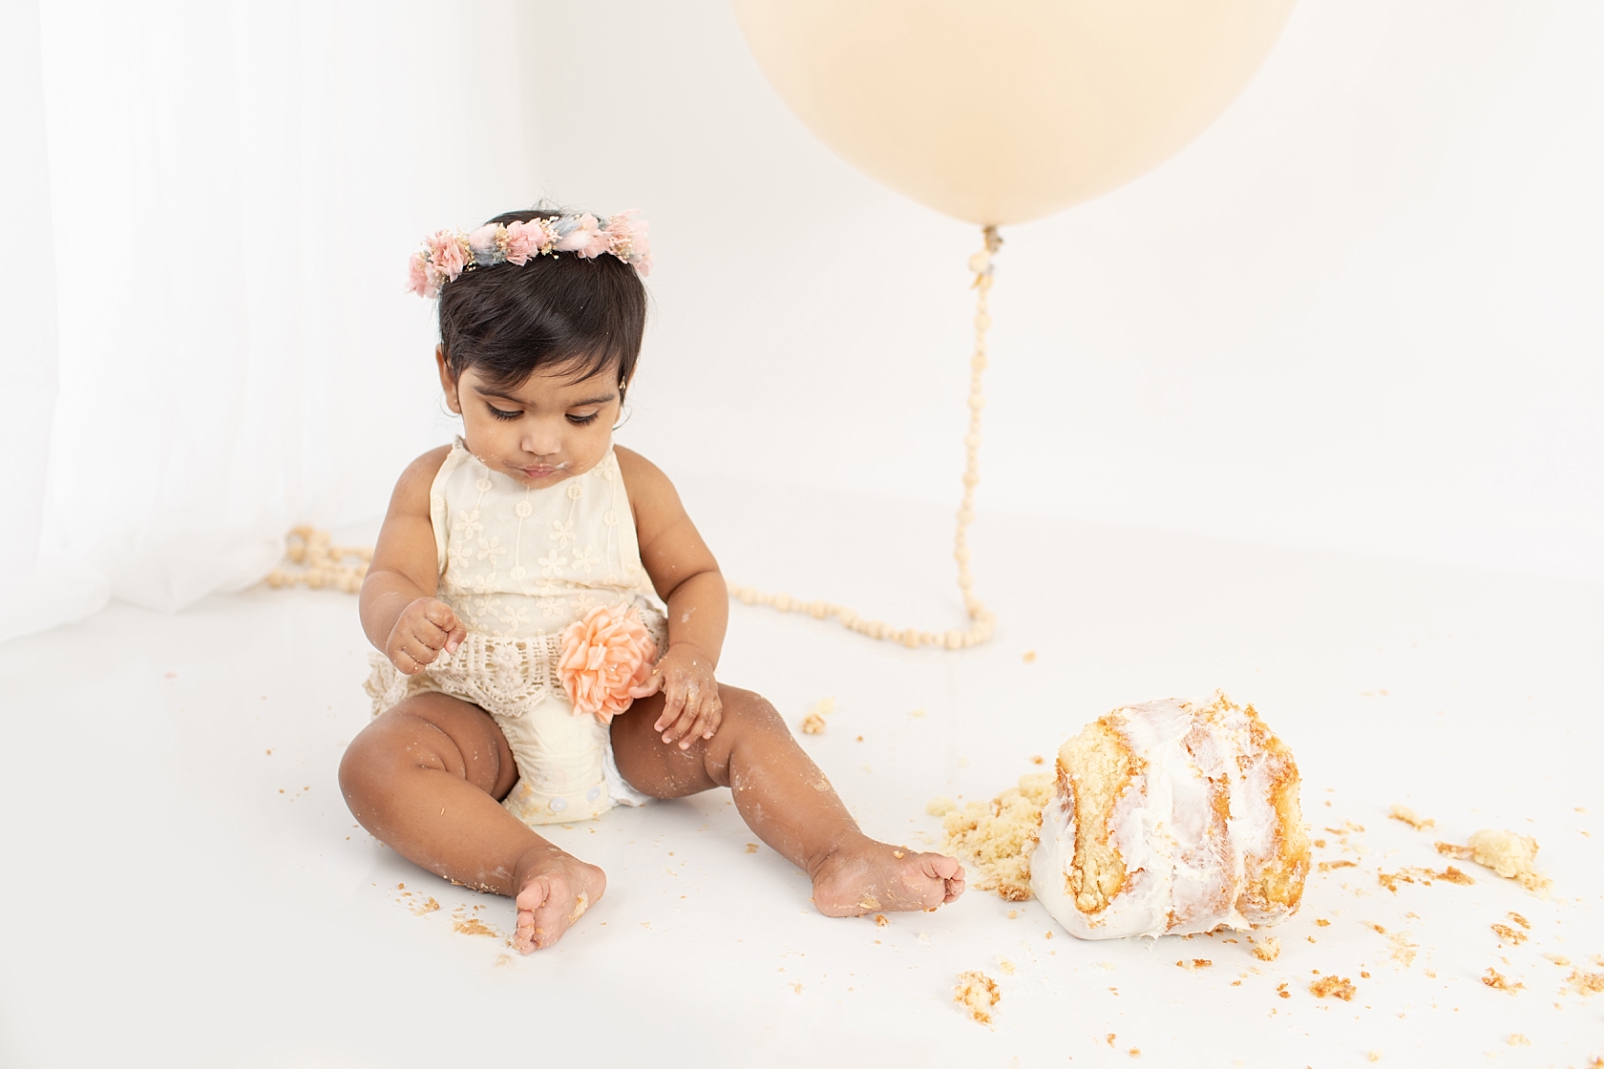 How to Choose a Smash Cake | 6" cake with textured white icing smashed on the floor and baby with decorative outfit and balloon eating cake
